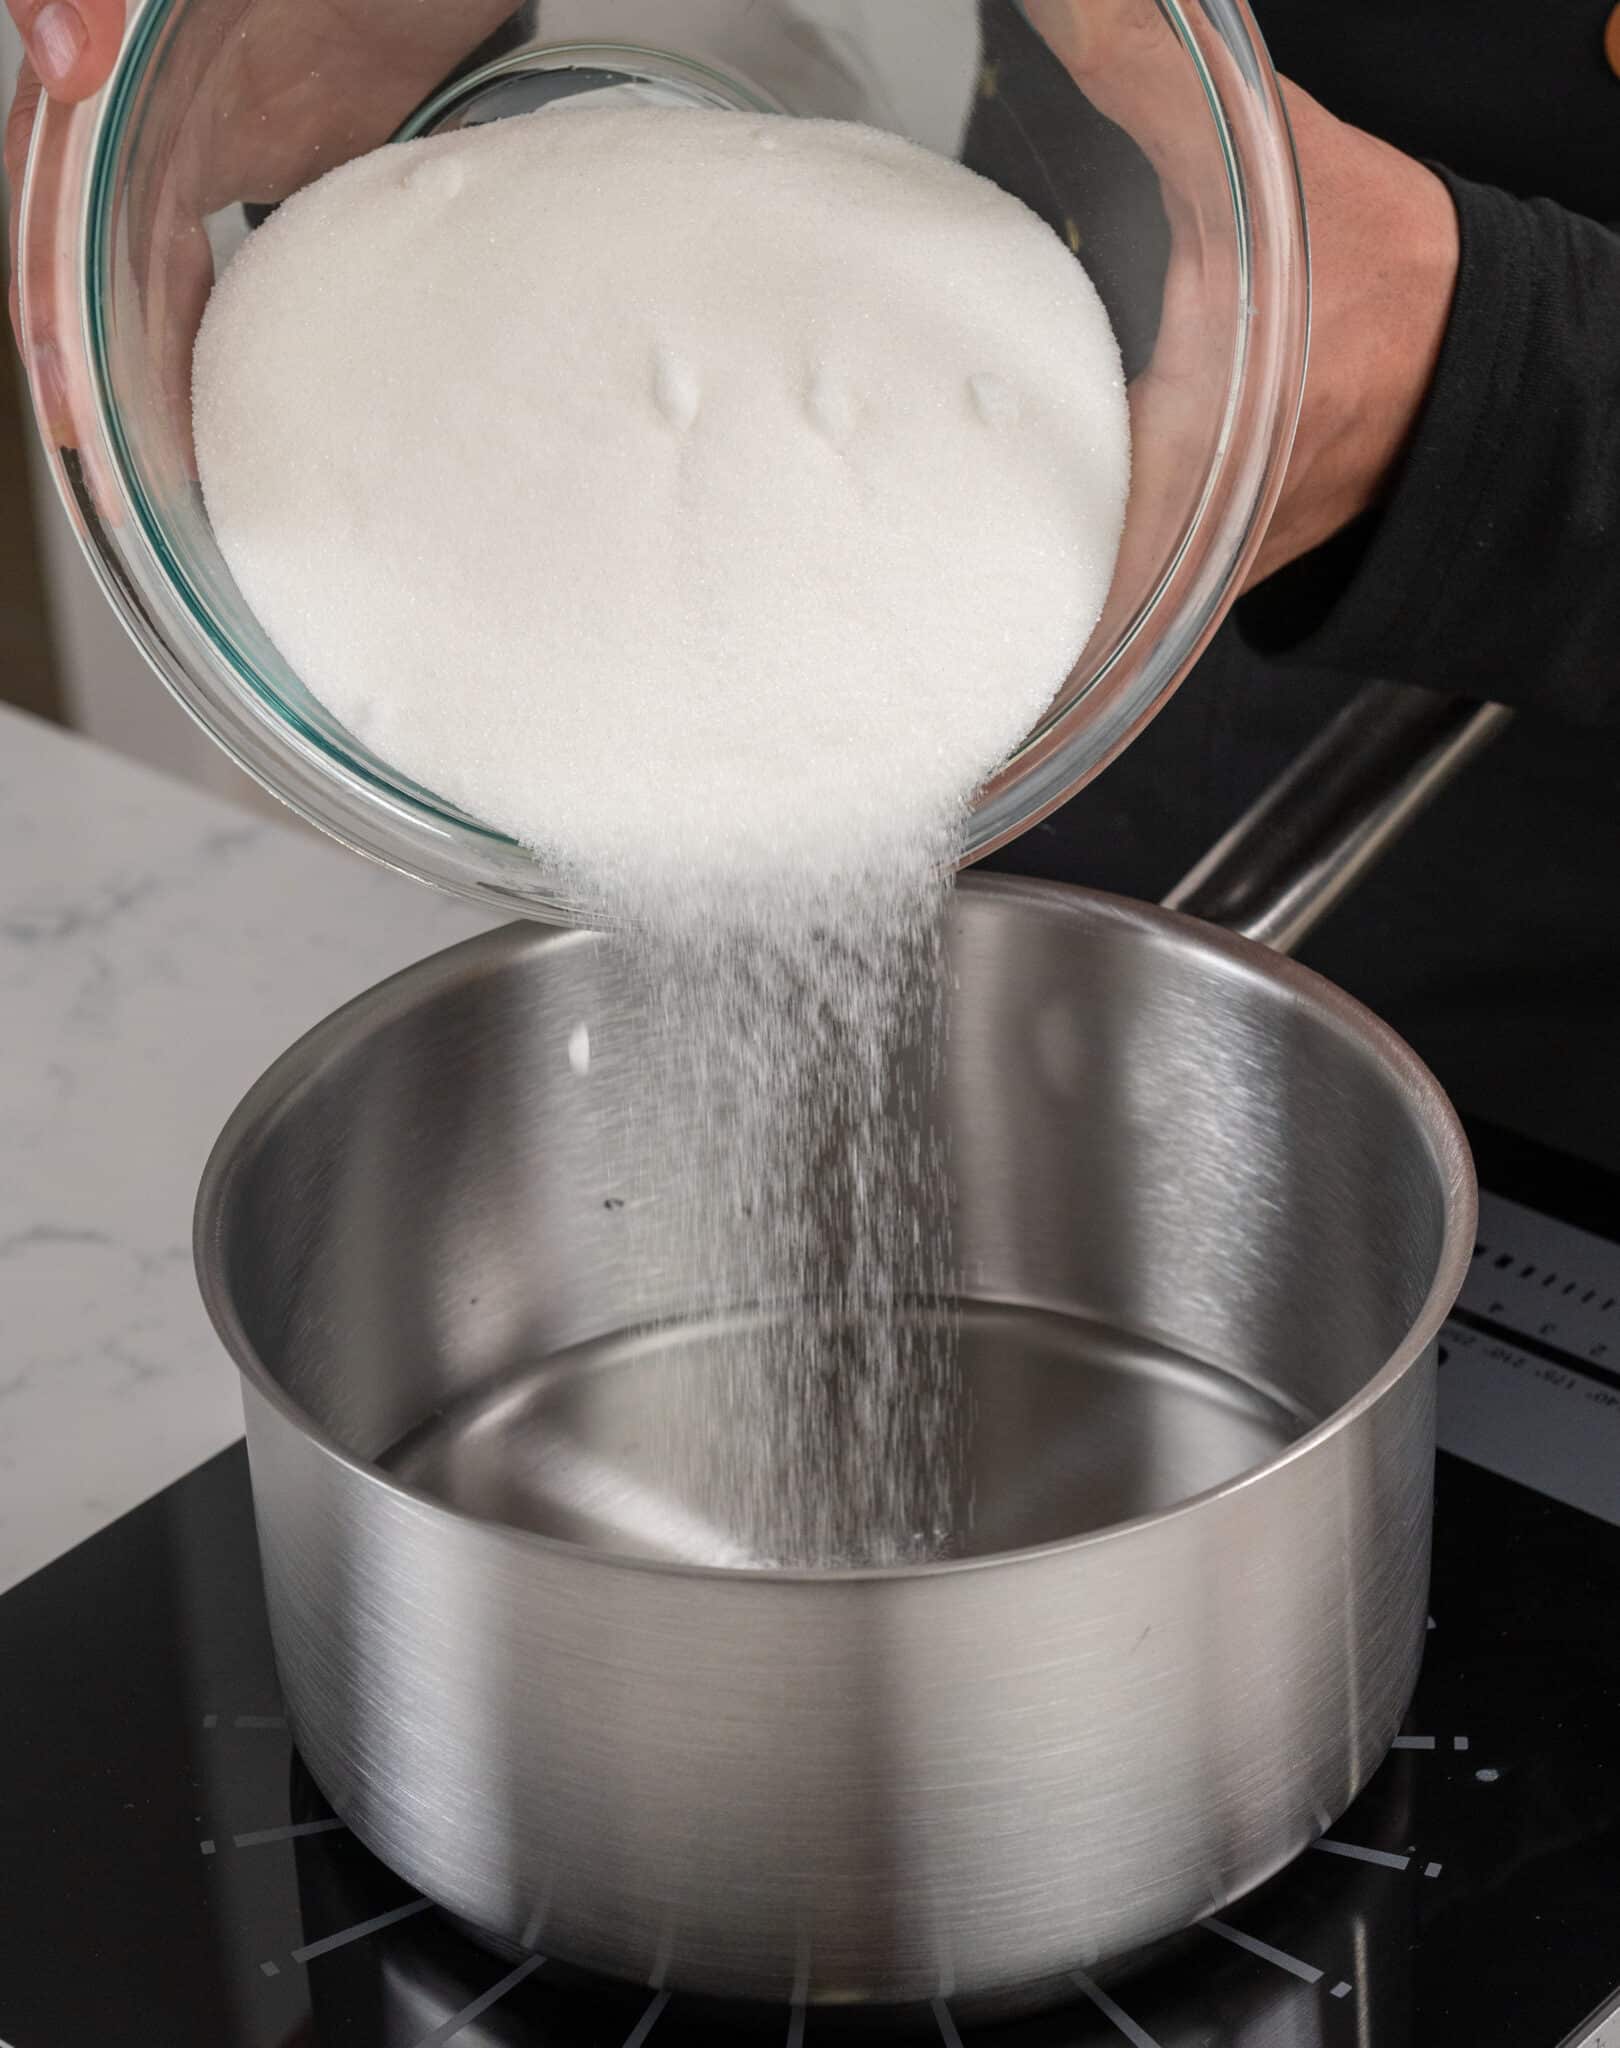 hands pouring a bowl of sugar into a large metal saucepan